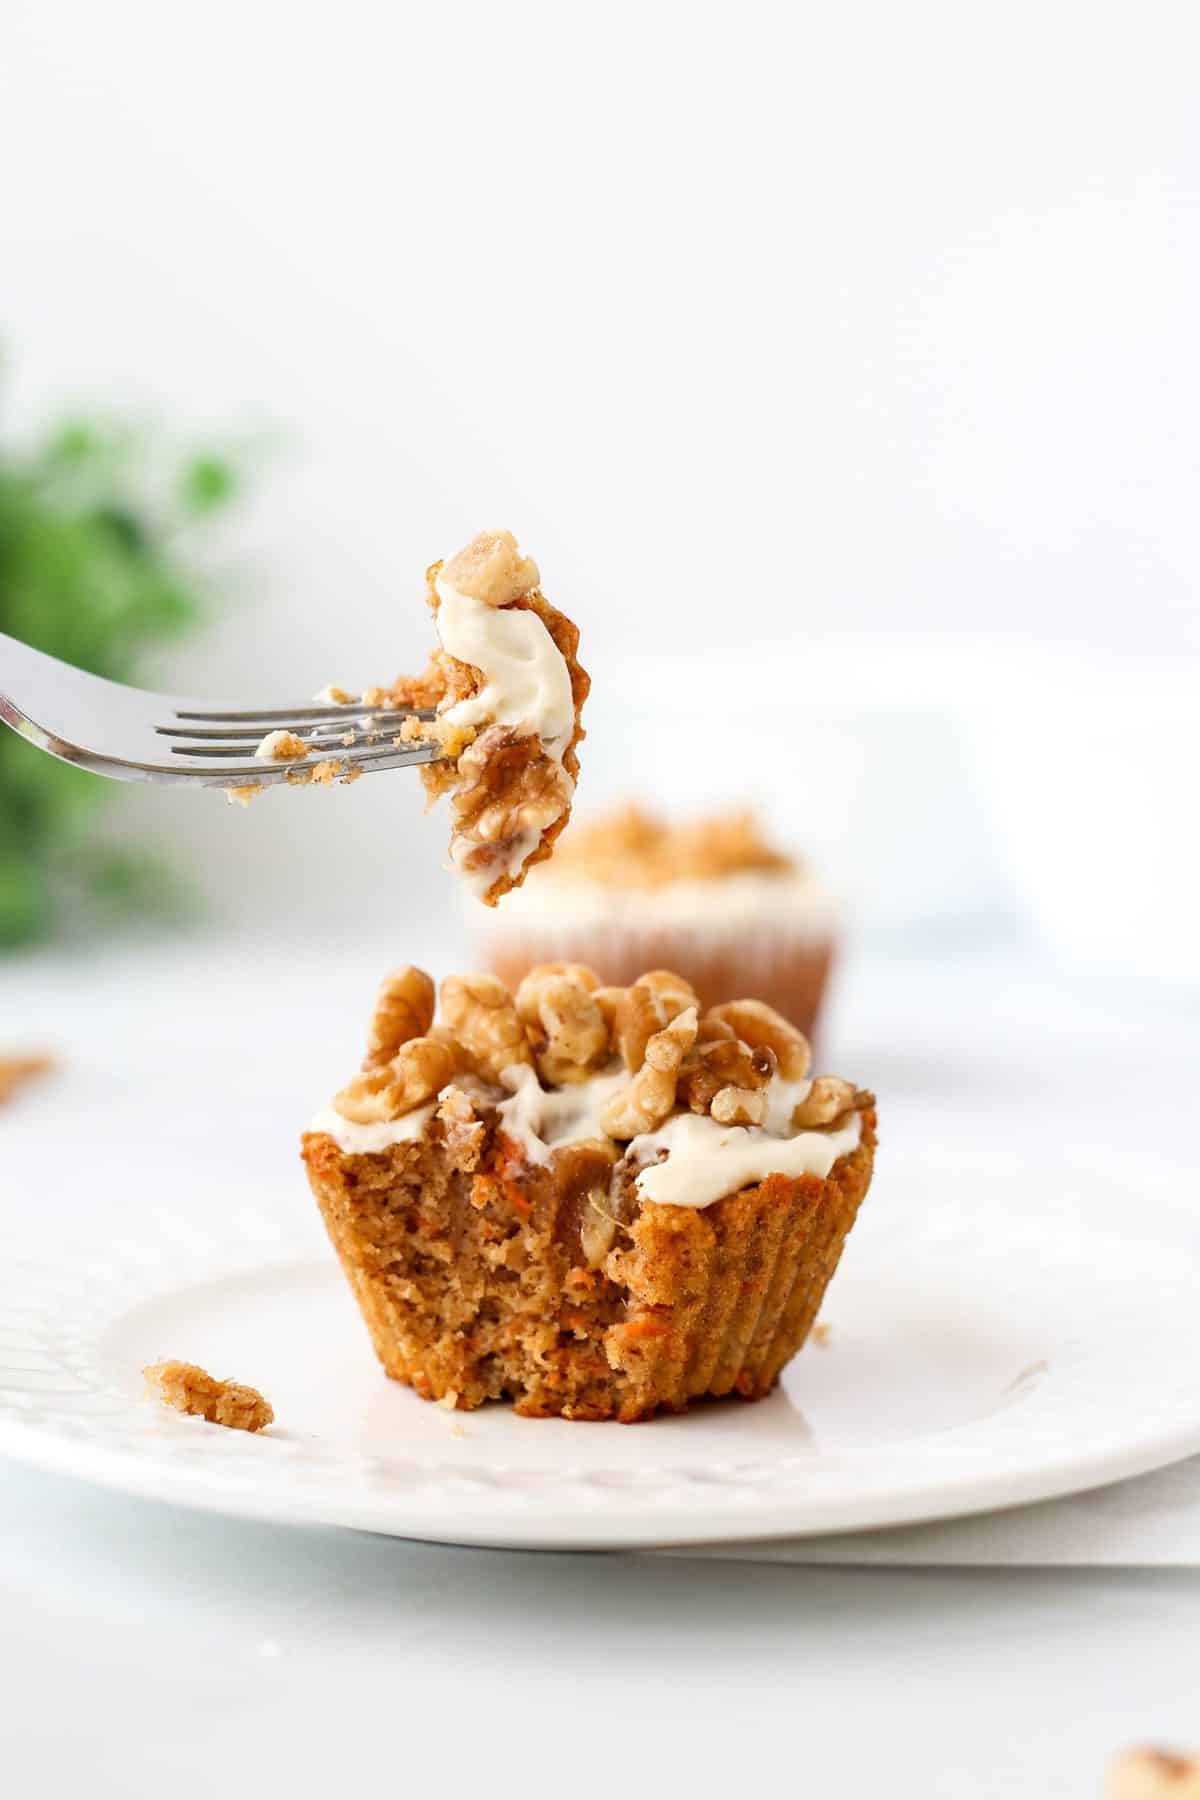 A fork taking a piece of the carrot cake muffin.